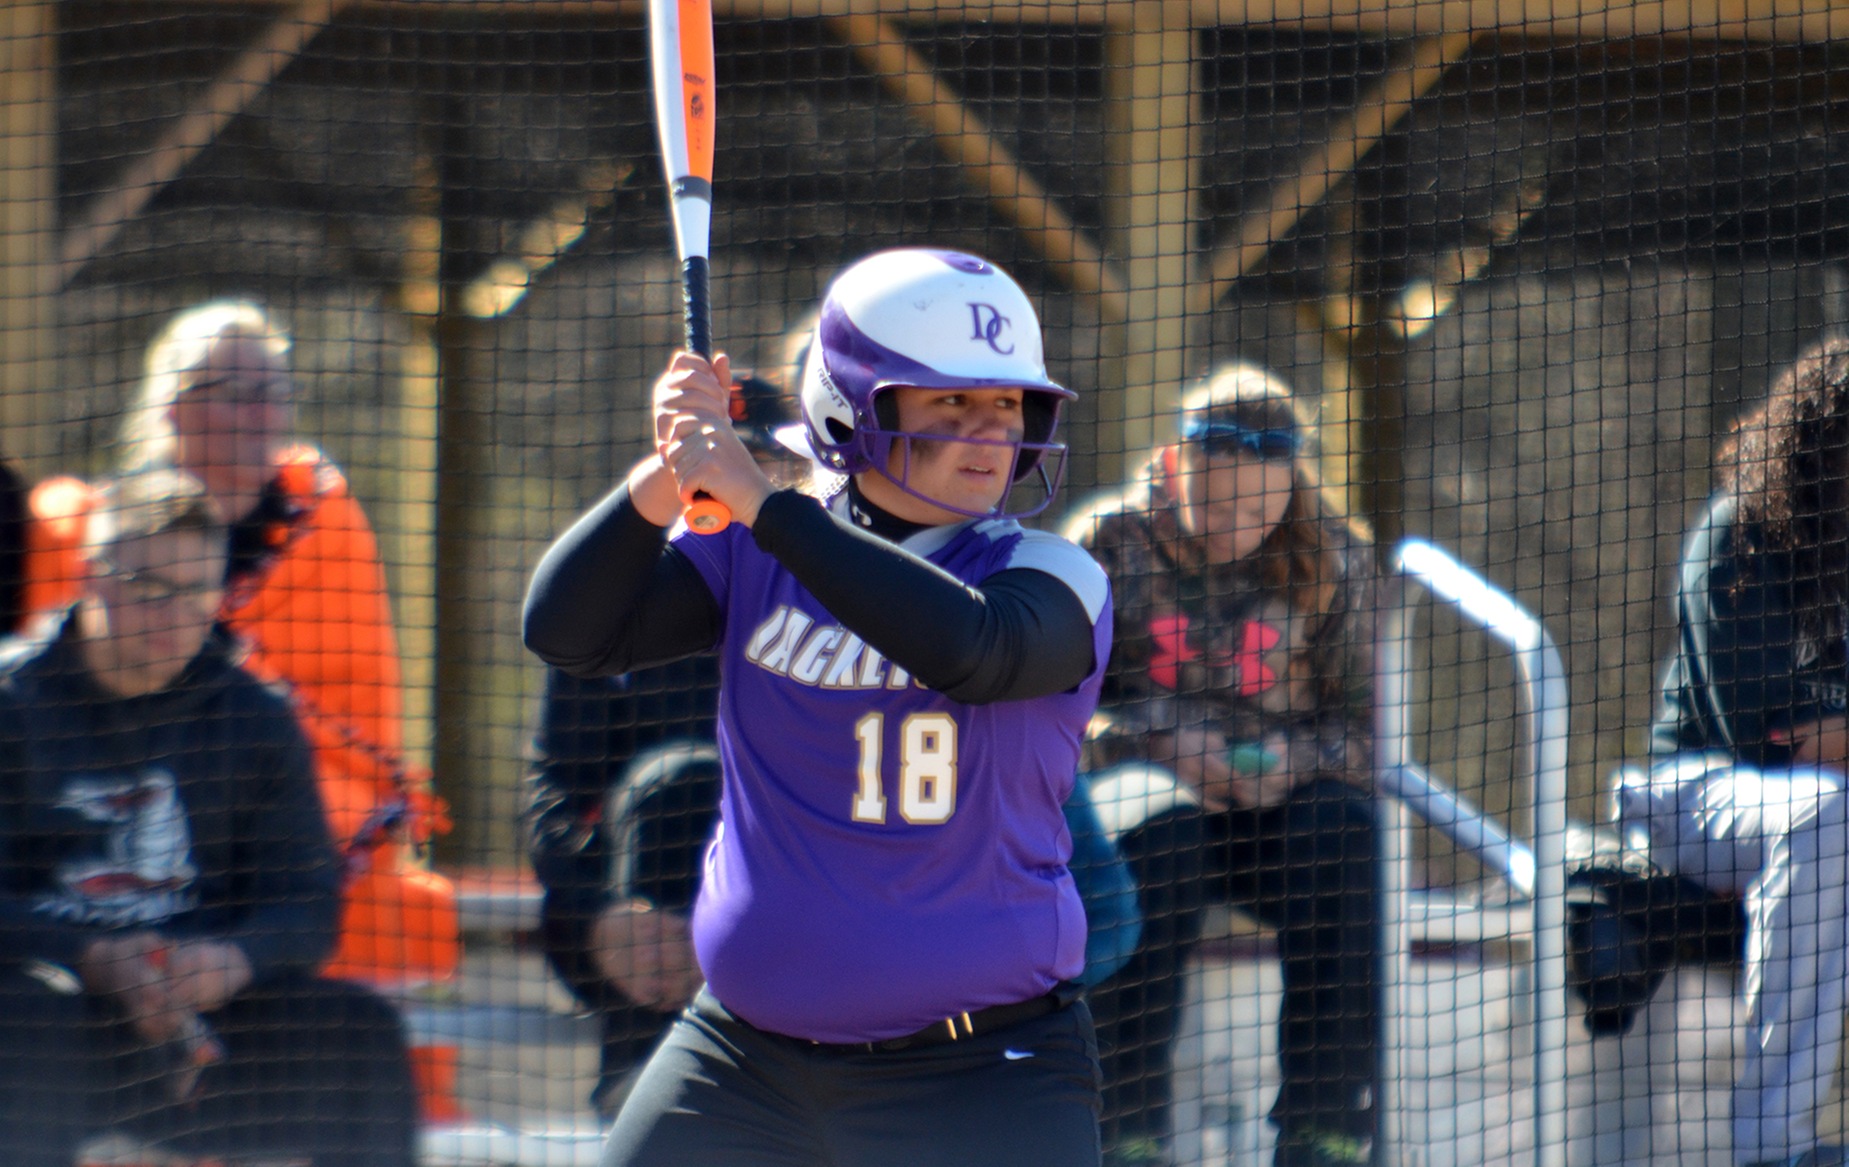 Kuhn Hits a Grand Slam in Losses to Hanover (Ind.)